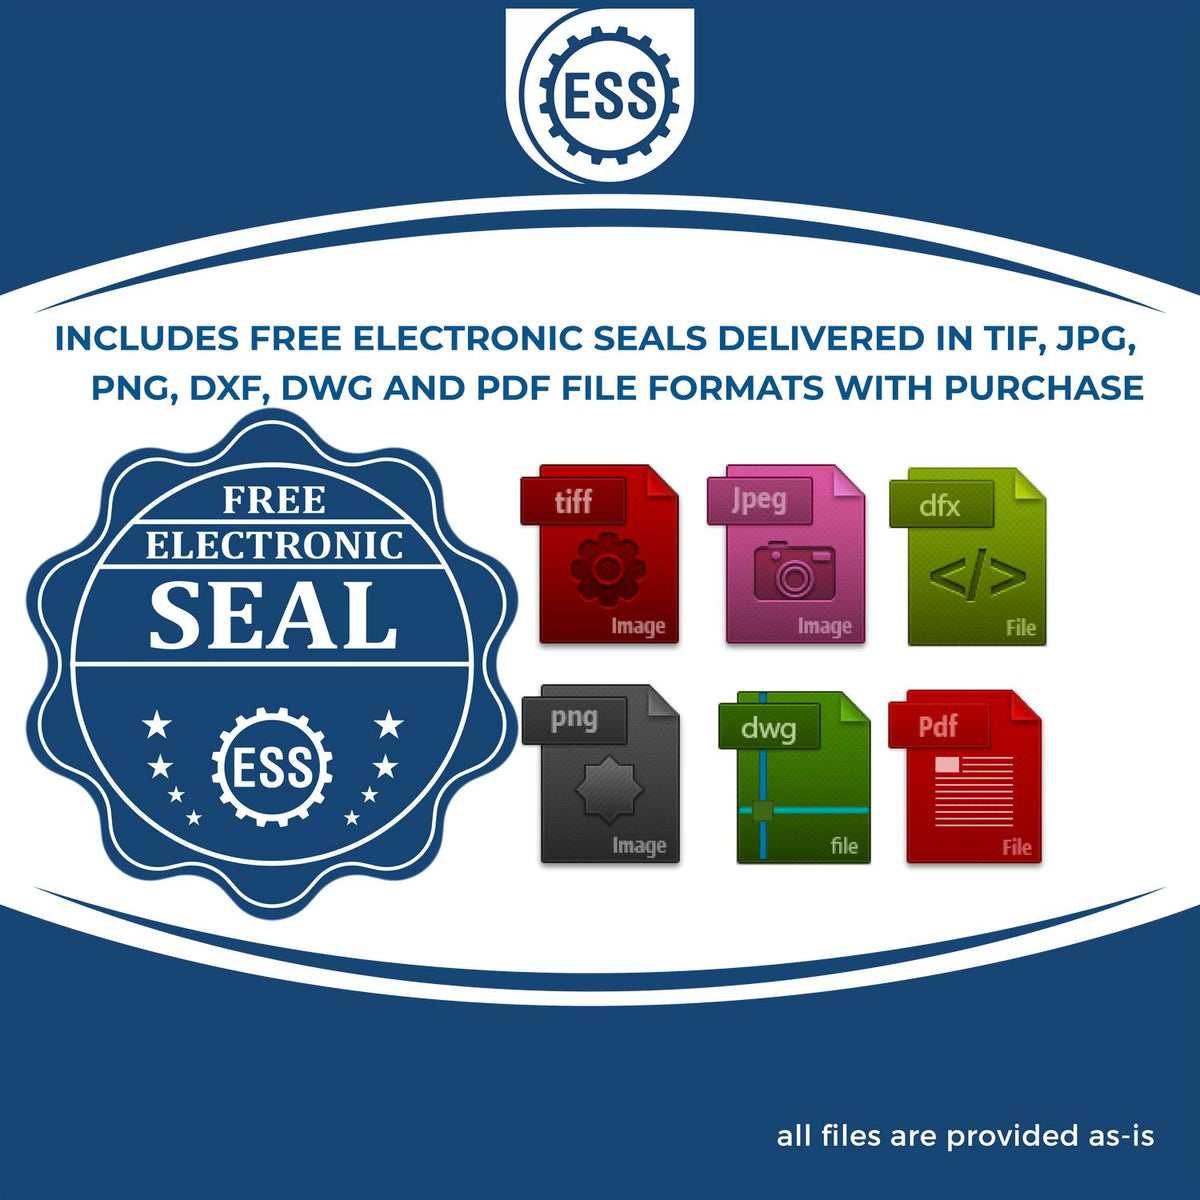 An infographic for the free electronic seal for the Gift Colorado Geologist Seal illustrating the different file type icons such as DXF, DWG, TIF, JPG and PNG.